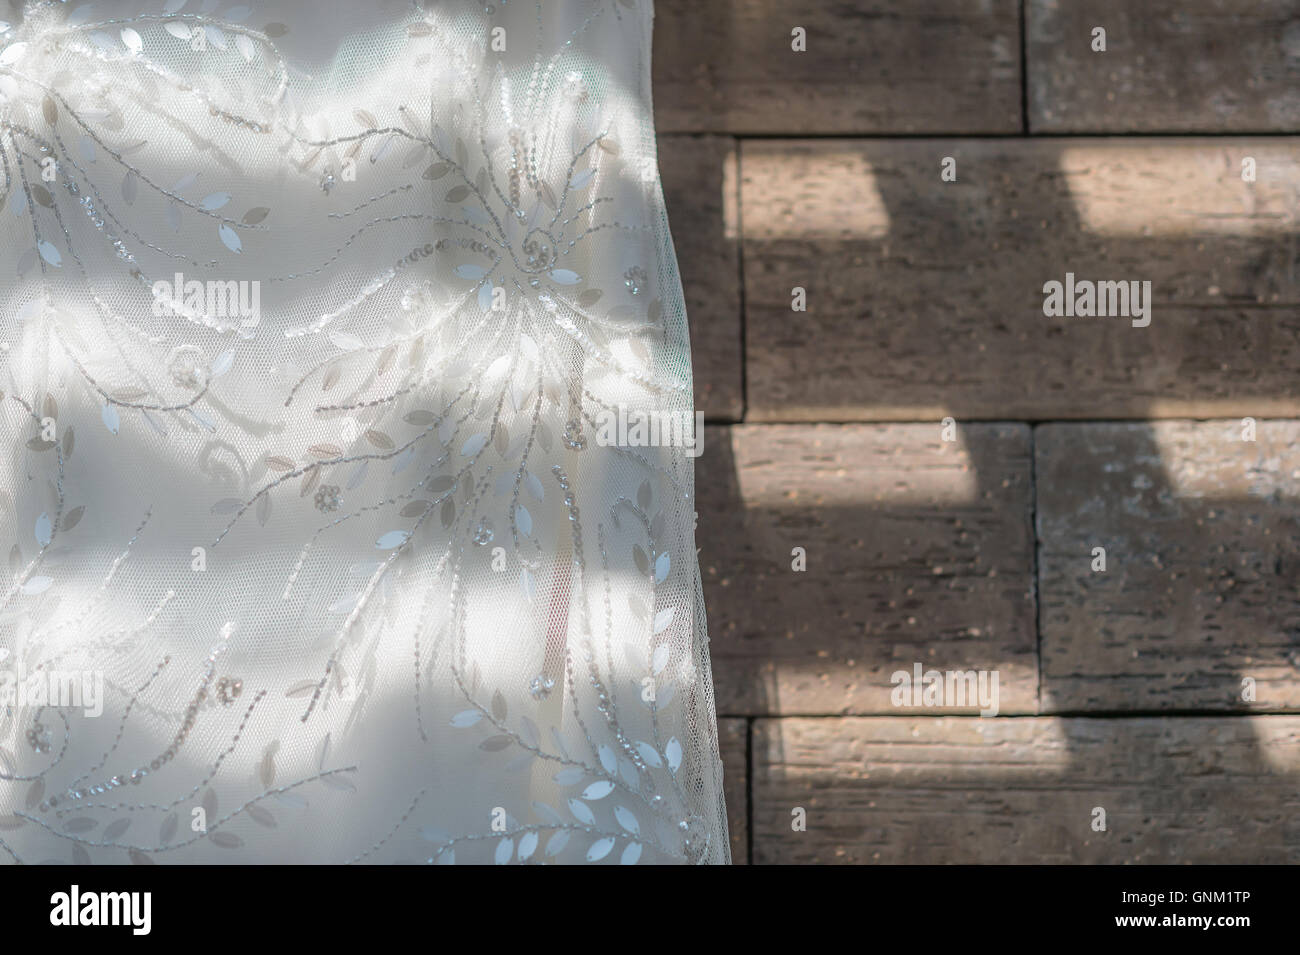 Wedding dress close up hanging on brown granite background, painted with light and shadow. Stock Photo